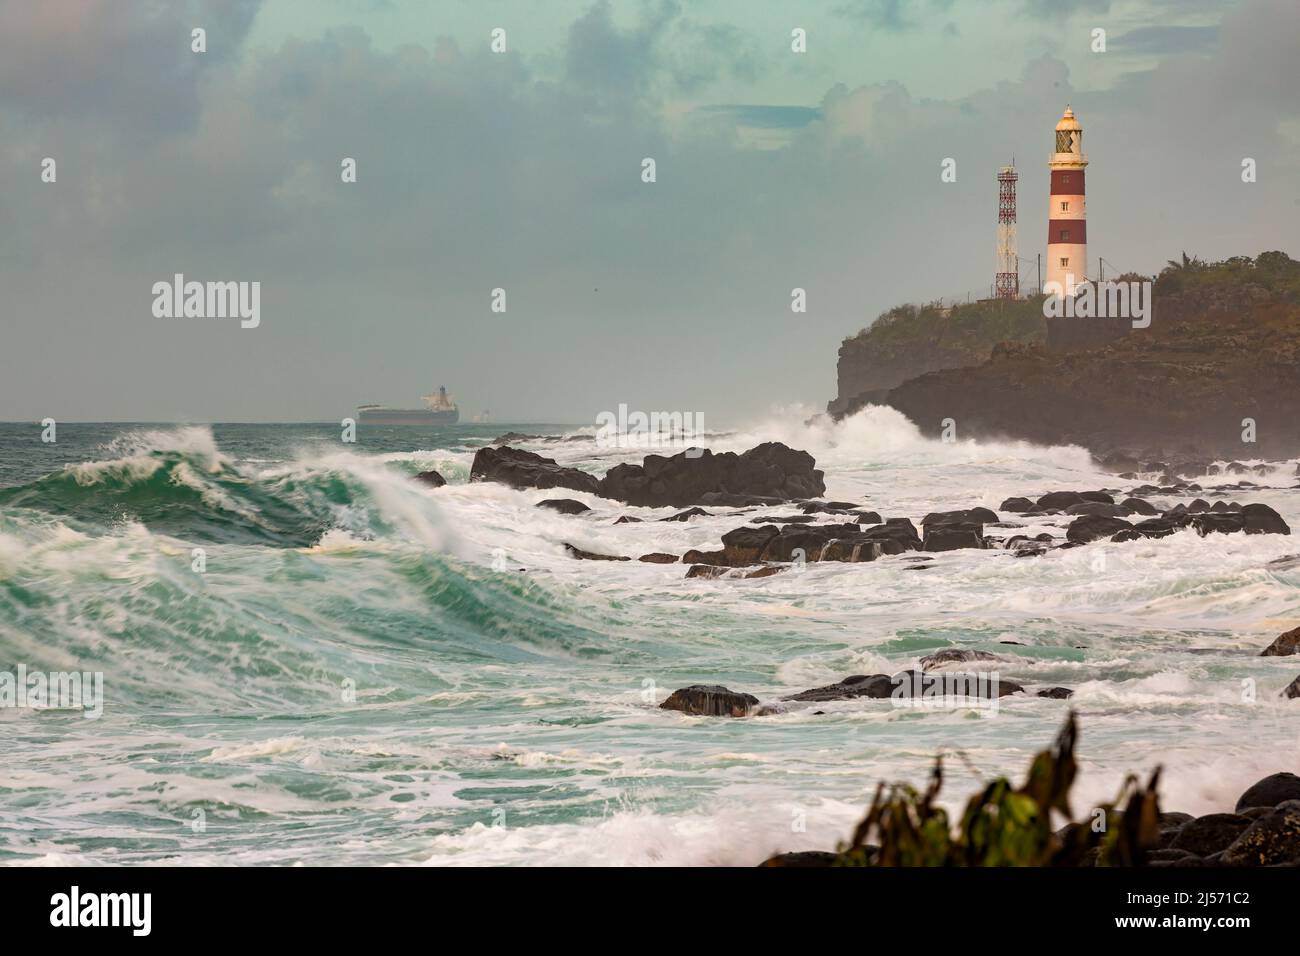 The Albion Lighthouse, otherwise known as the Pointe aux Caves Lighthouse during tropical cyclone, Batsirai in the island of Mauritius. Stock Photo